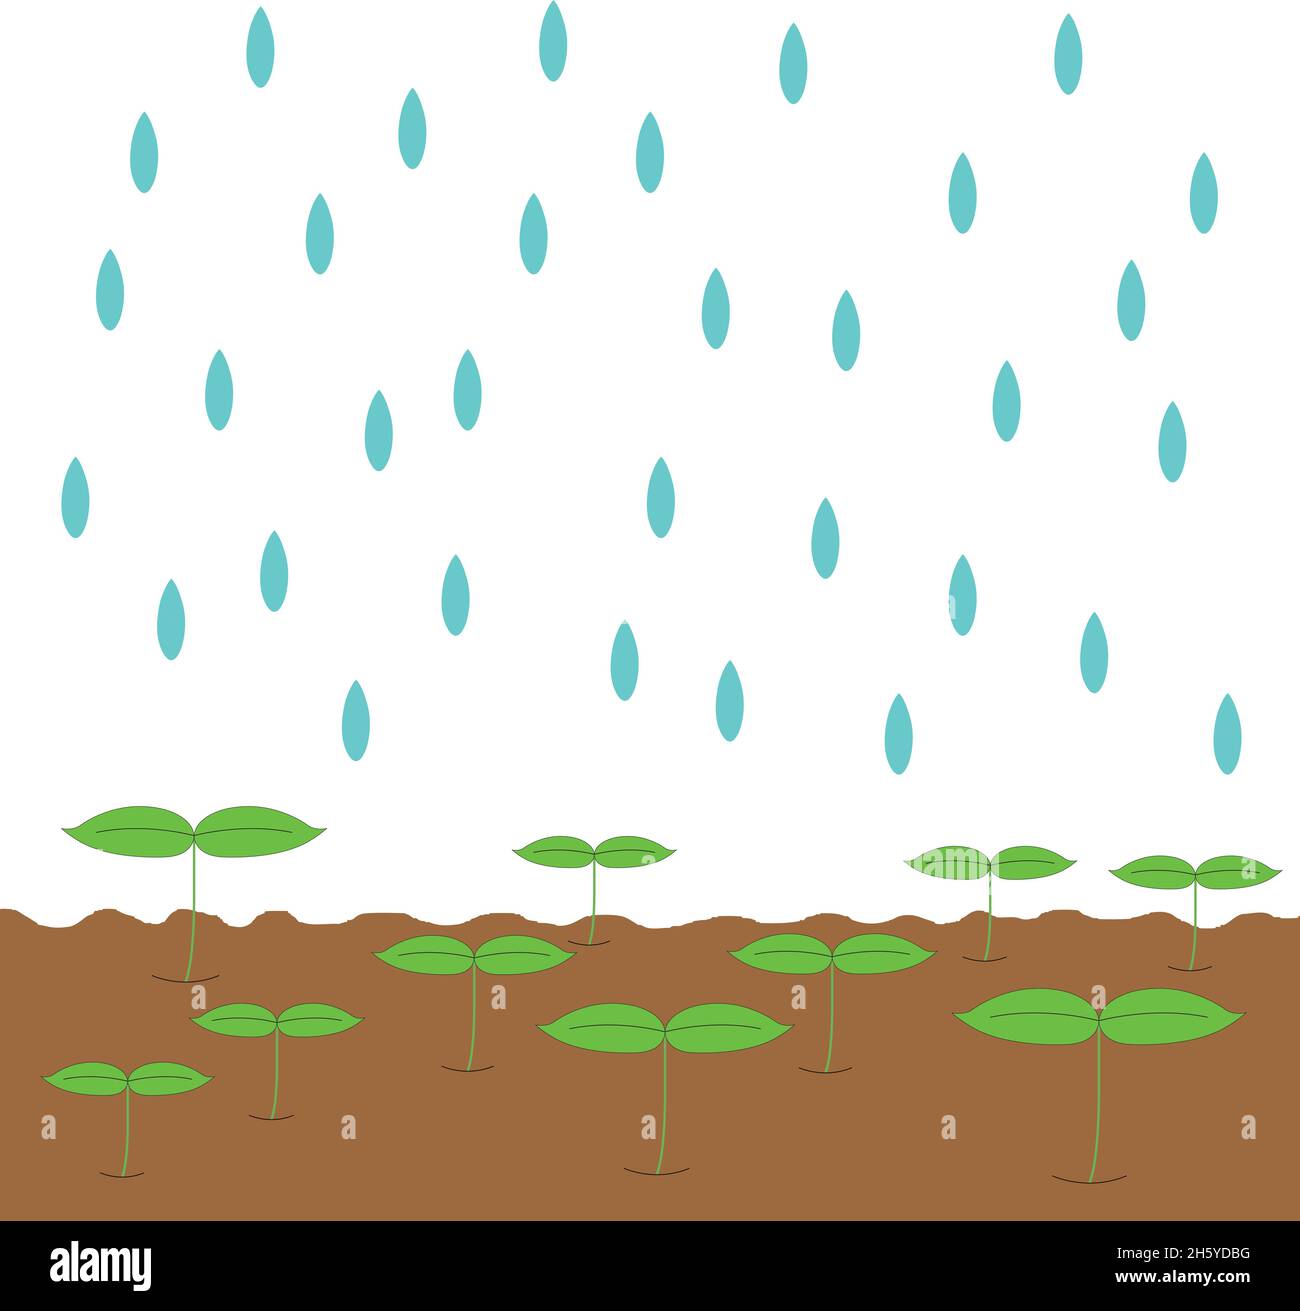 It is raining on the sprouts growing on the ground. Stock Vector